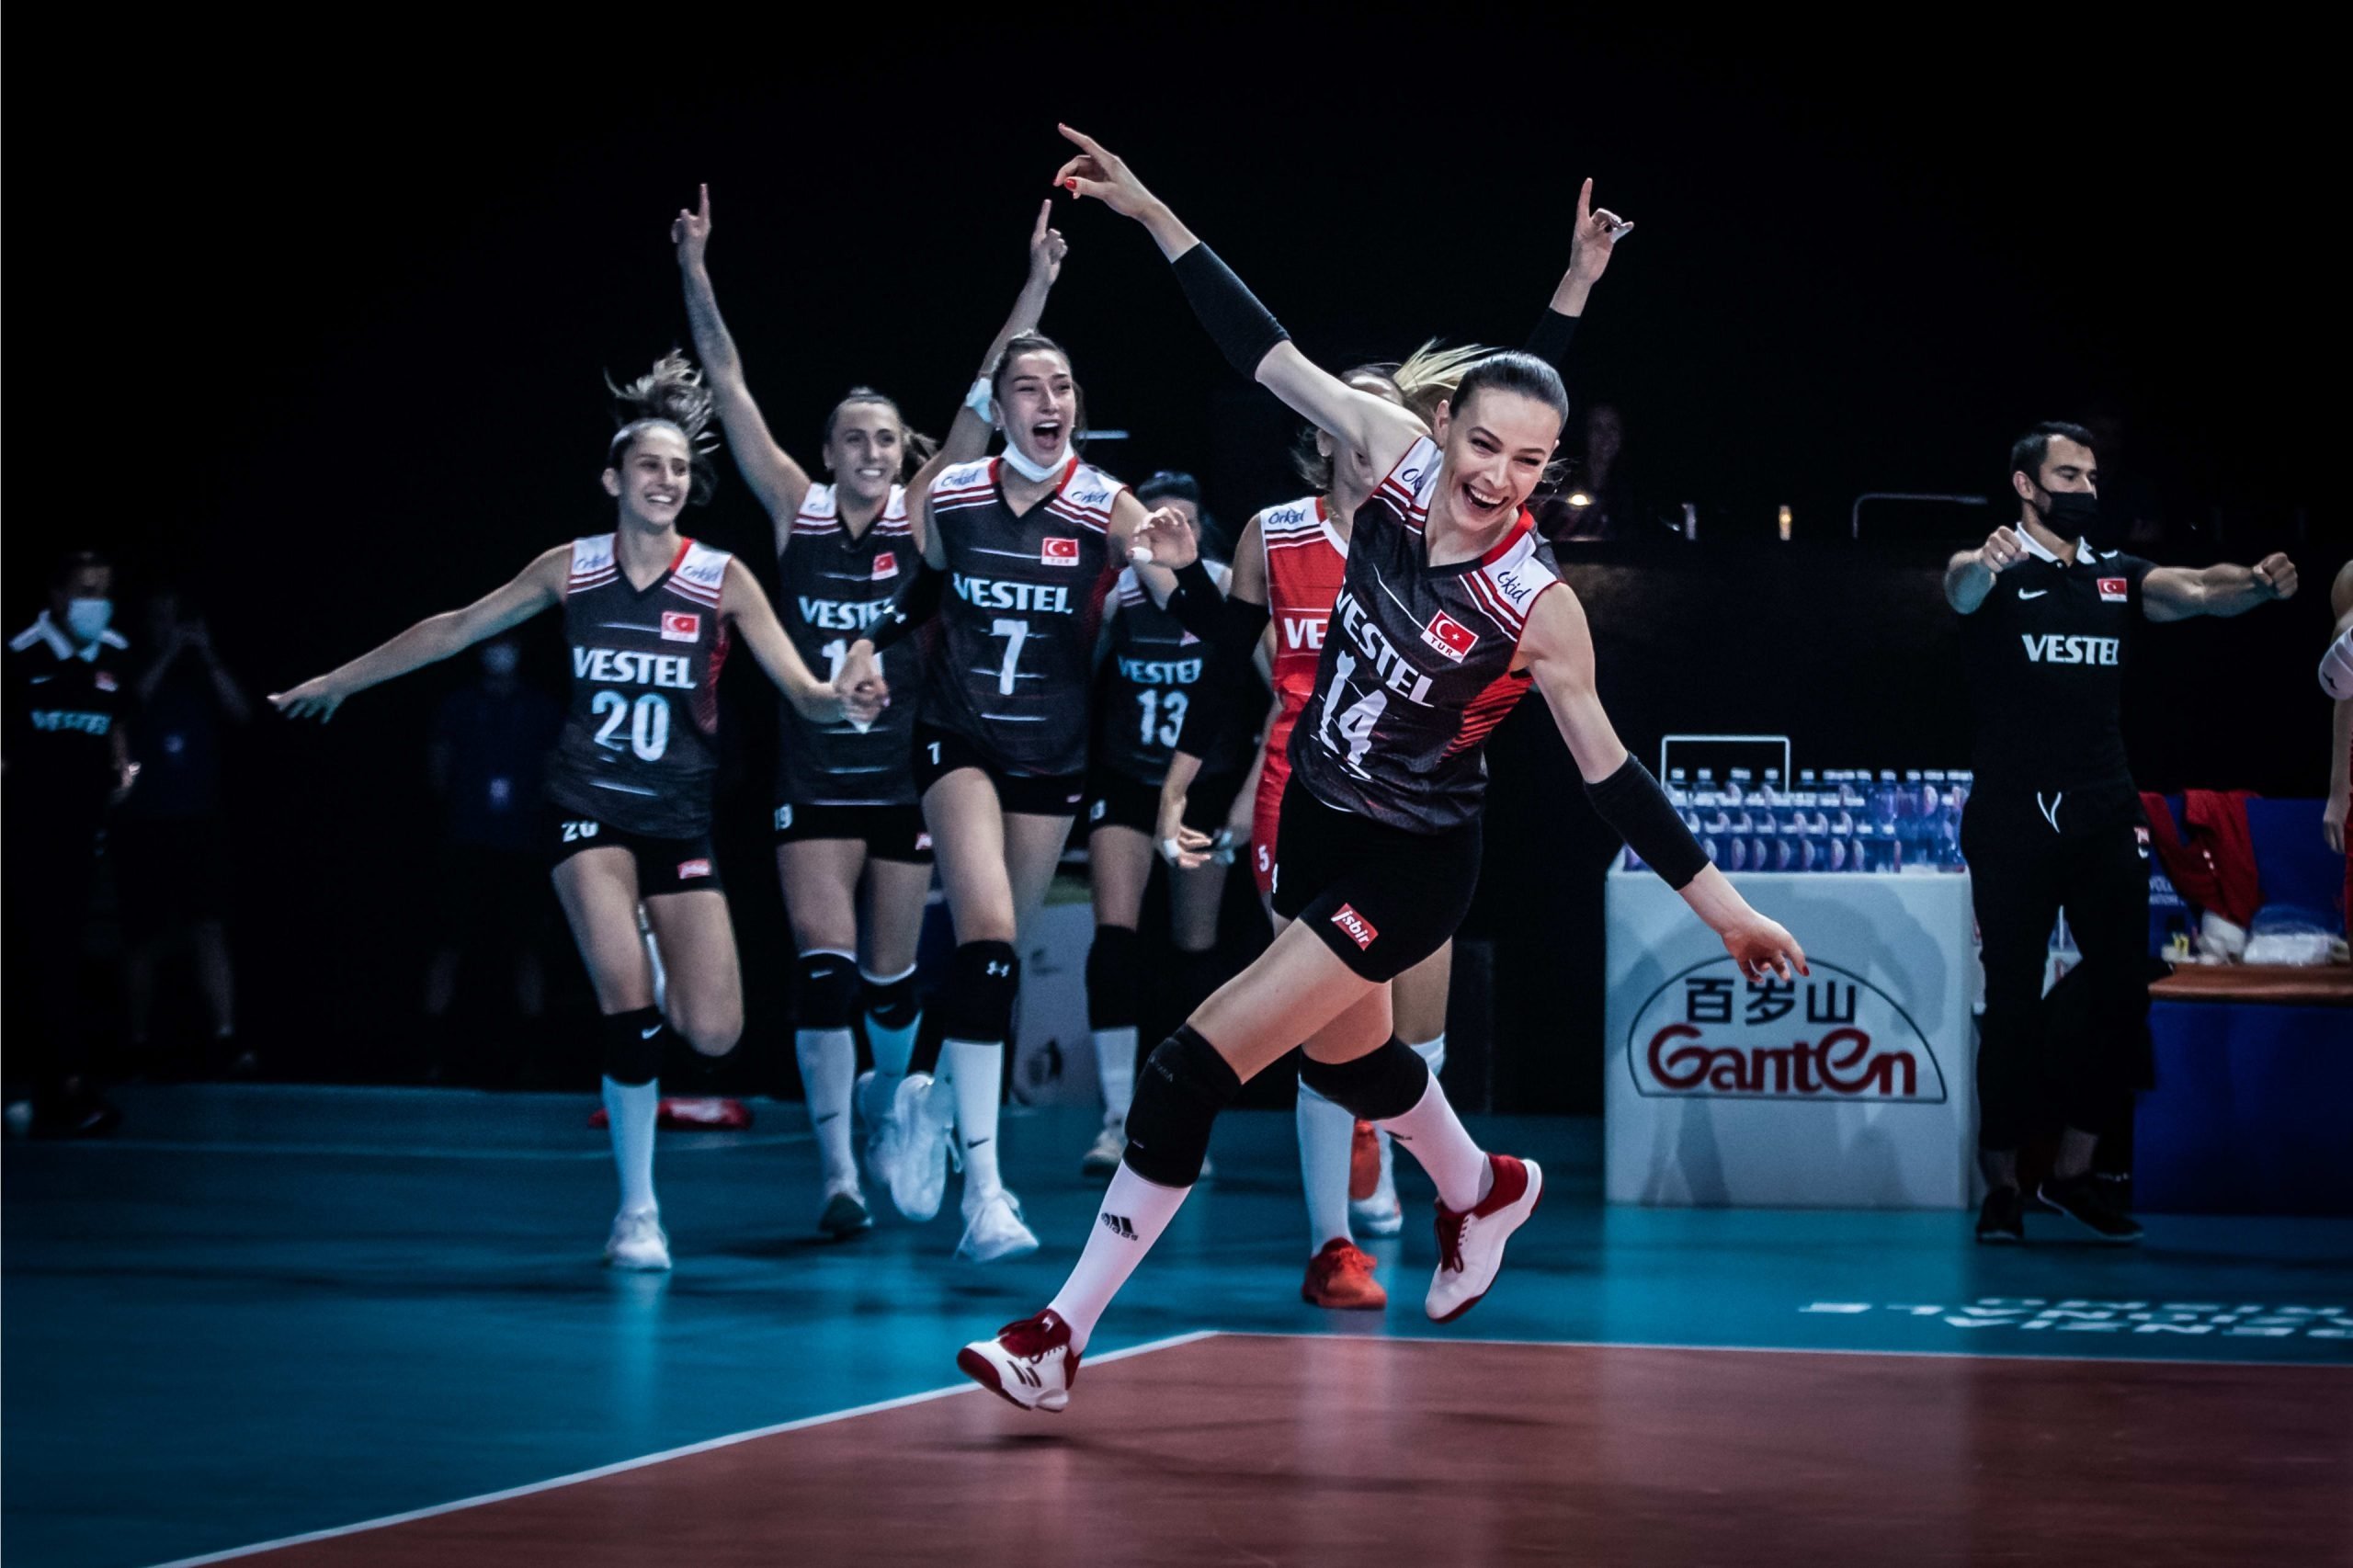 Turkey takes bronze in Volleyball Women's Nations League Daily Sabah